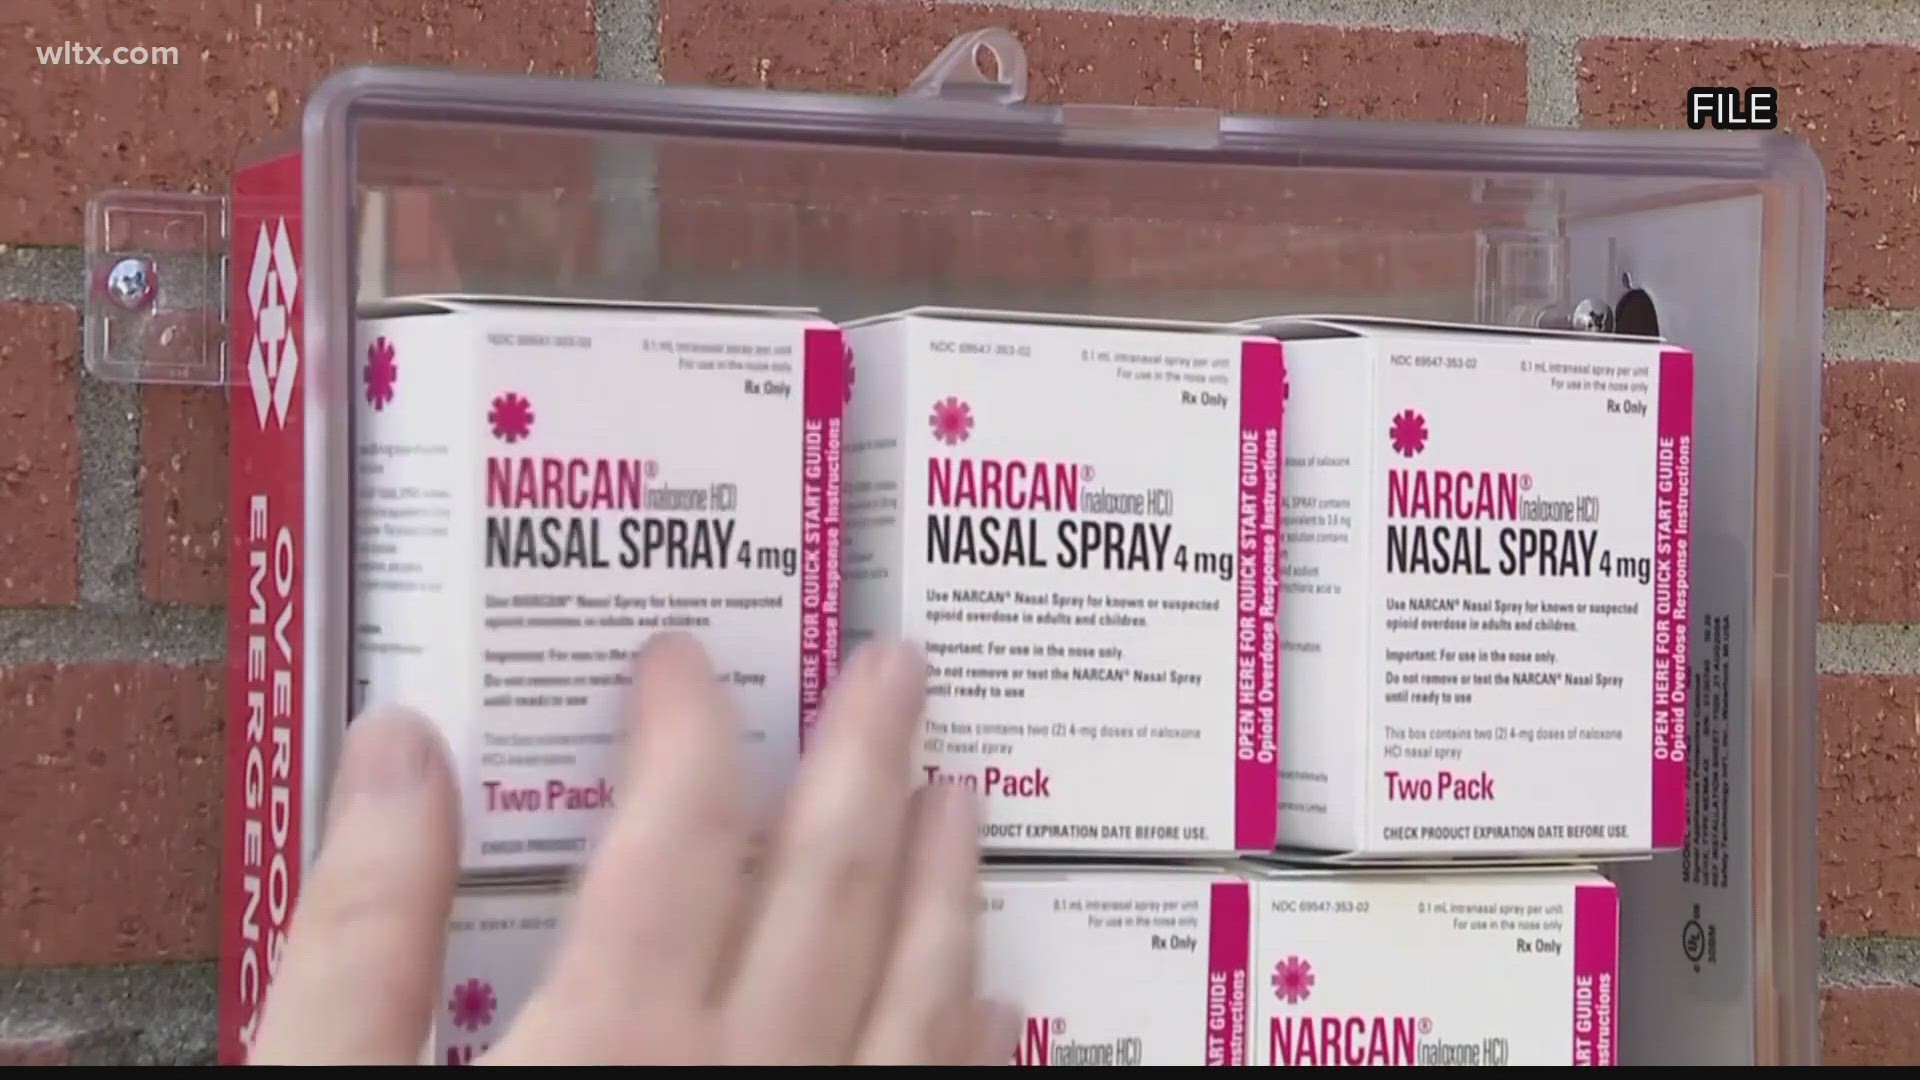 Schools across the state of South Carolina will have access to Narcan.